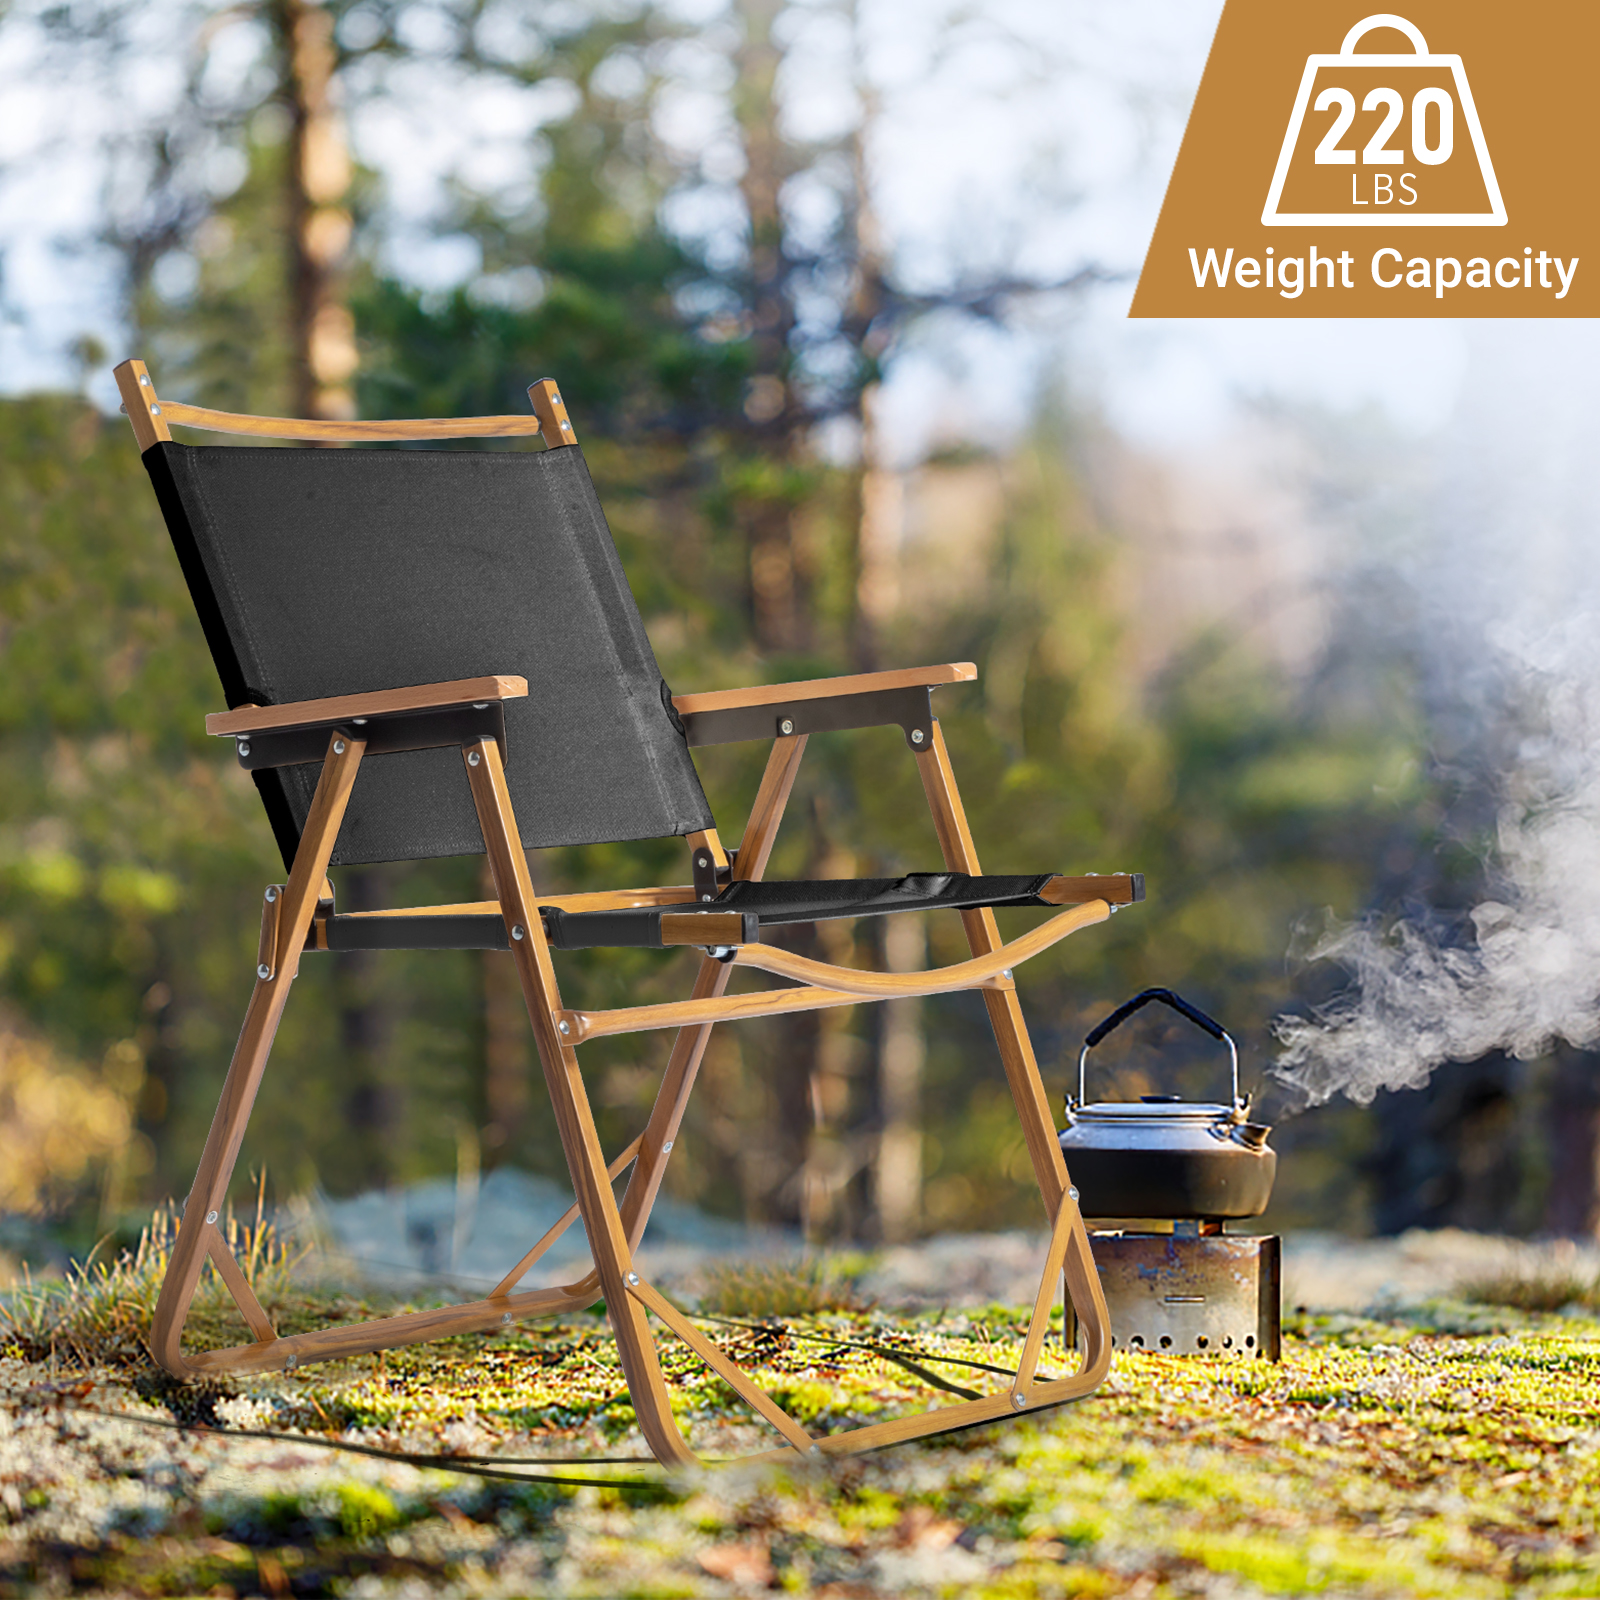 Winado Camping Chairs with Versatile Sports Chair Outdoor Chair & Lawn Chair Black - image 5 of 6